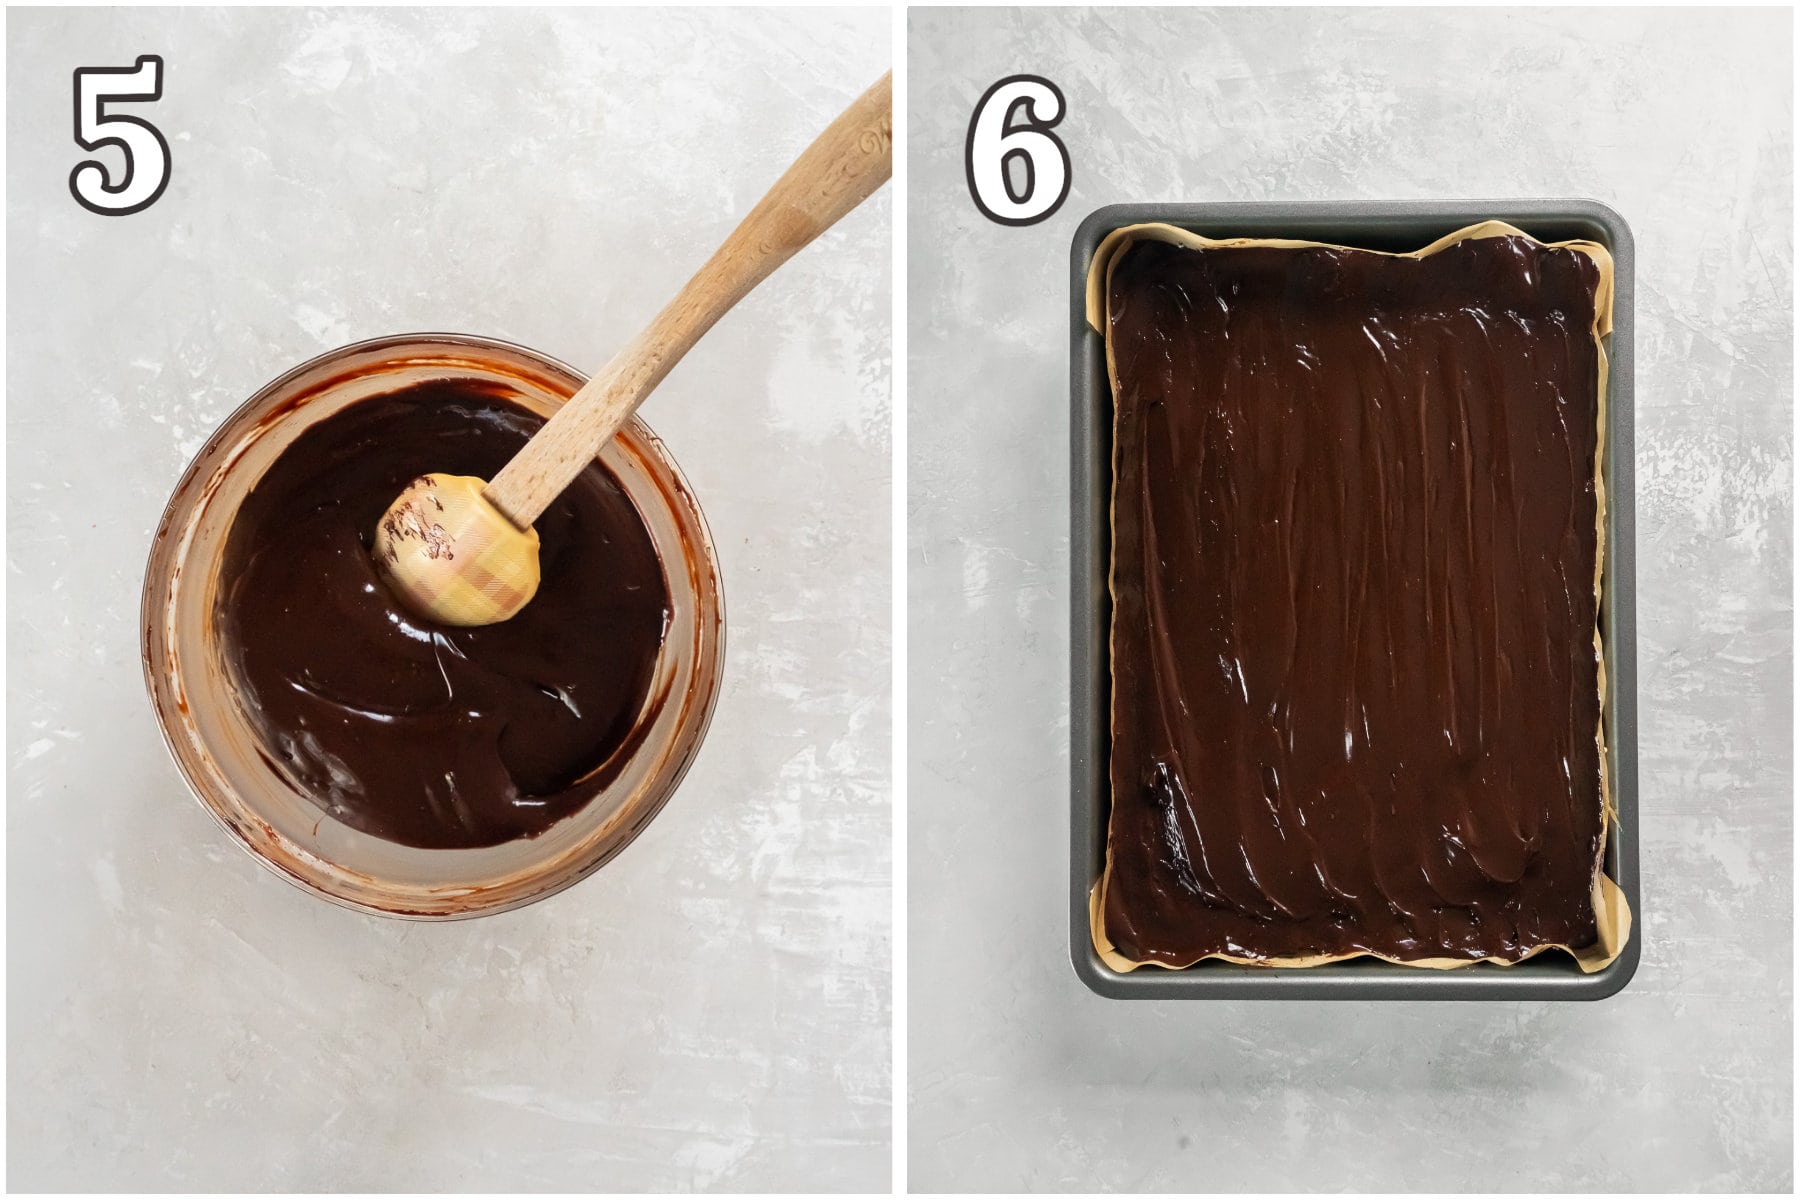 photo collage demonstrating how to make chocolate ganache topping for millionaire bars.